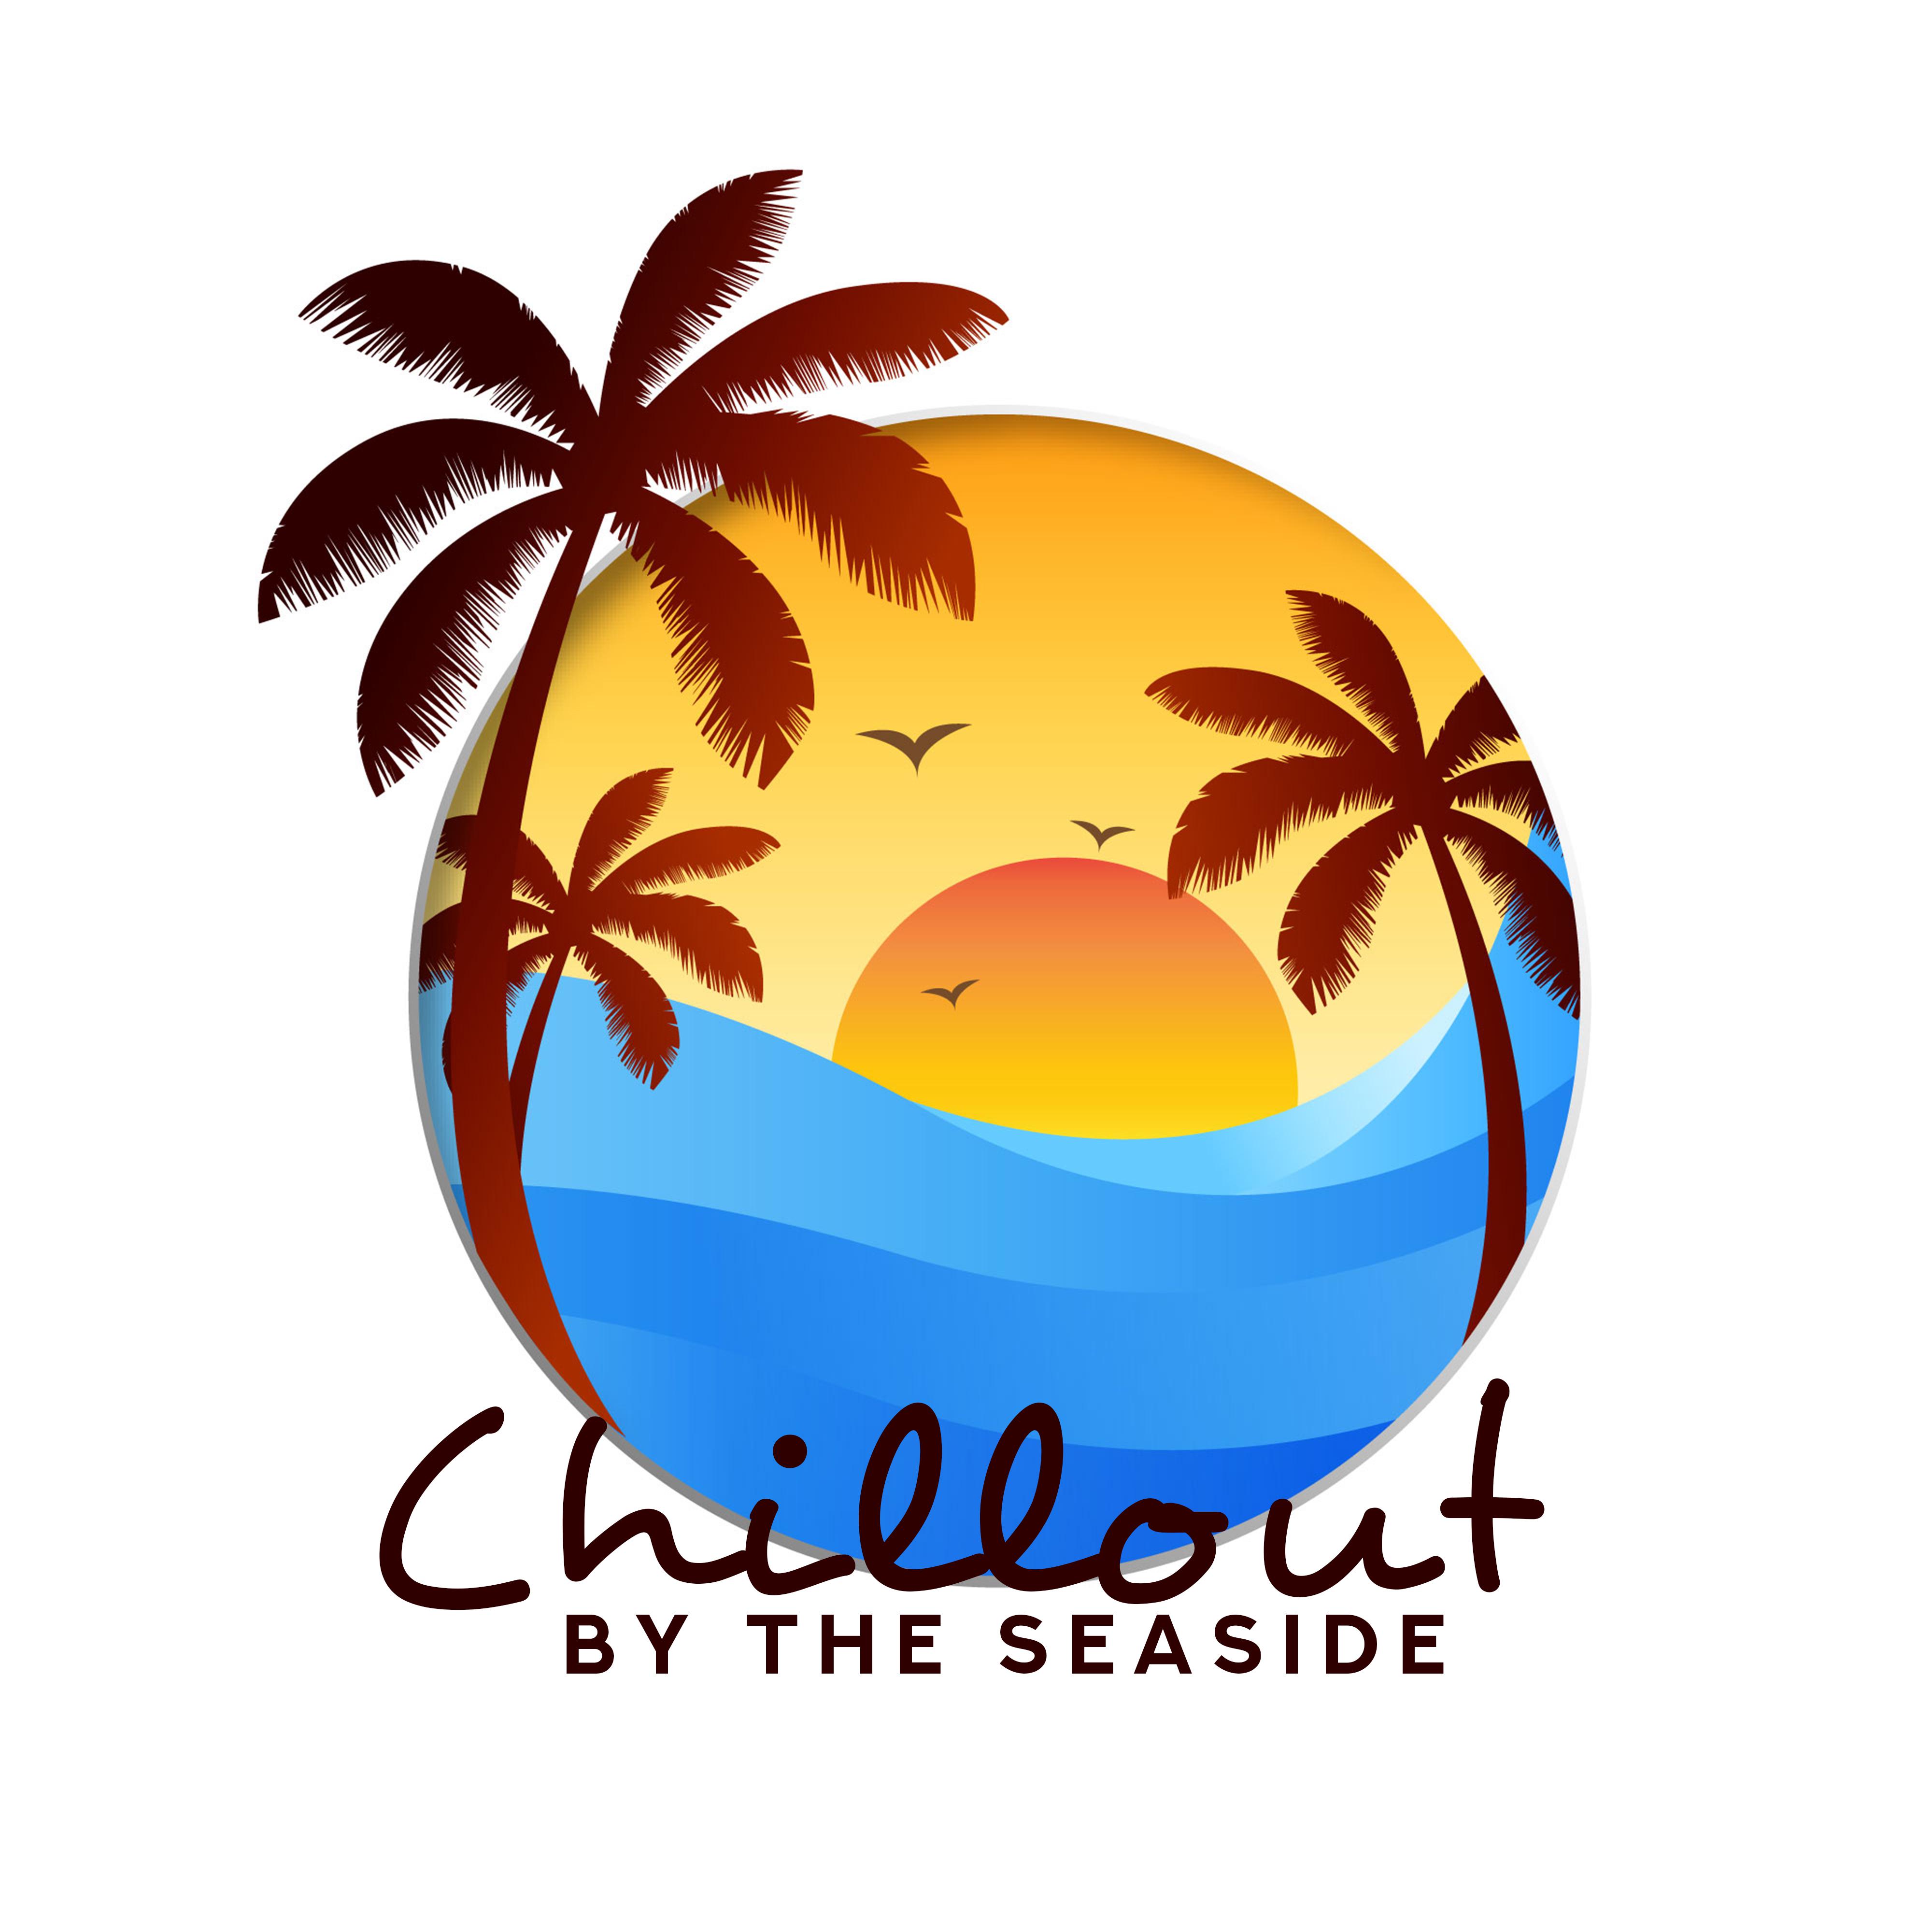 Chillout by the Seaside: Compilation of 15 Chill Out Songs for Total Relaxation, Summer Holiday Nice Time Spending, Deep Vibrations